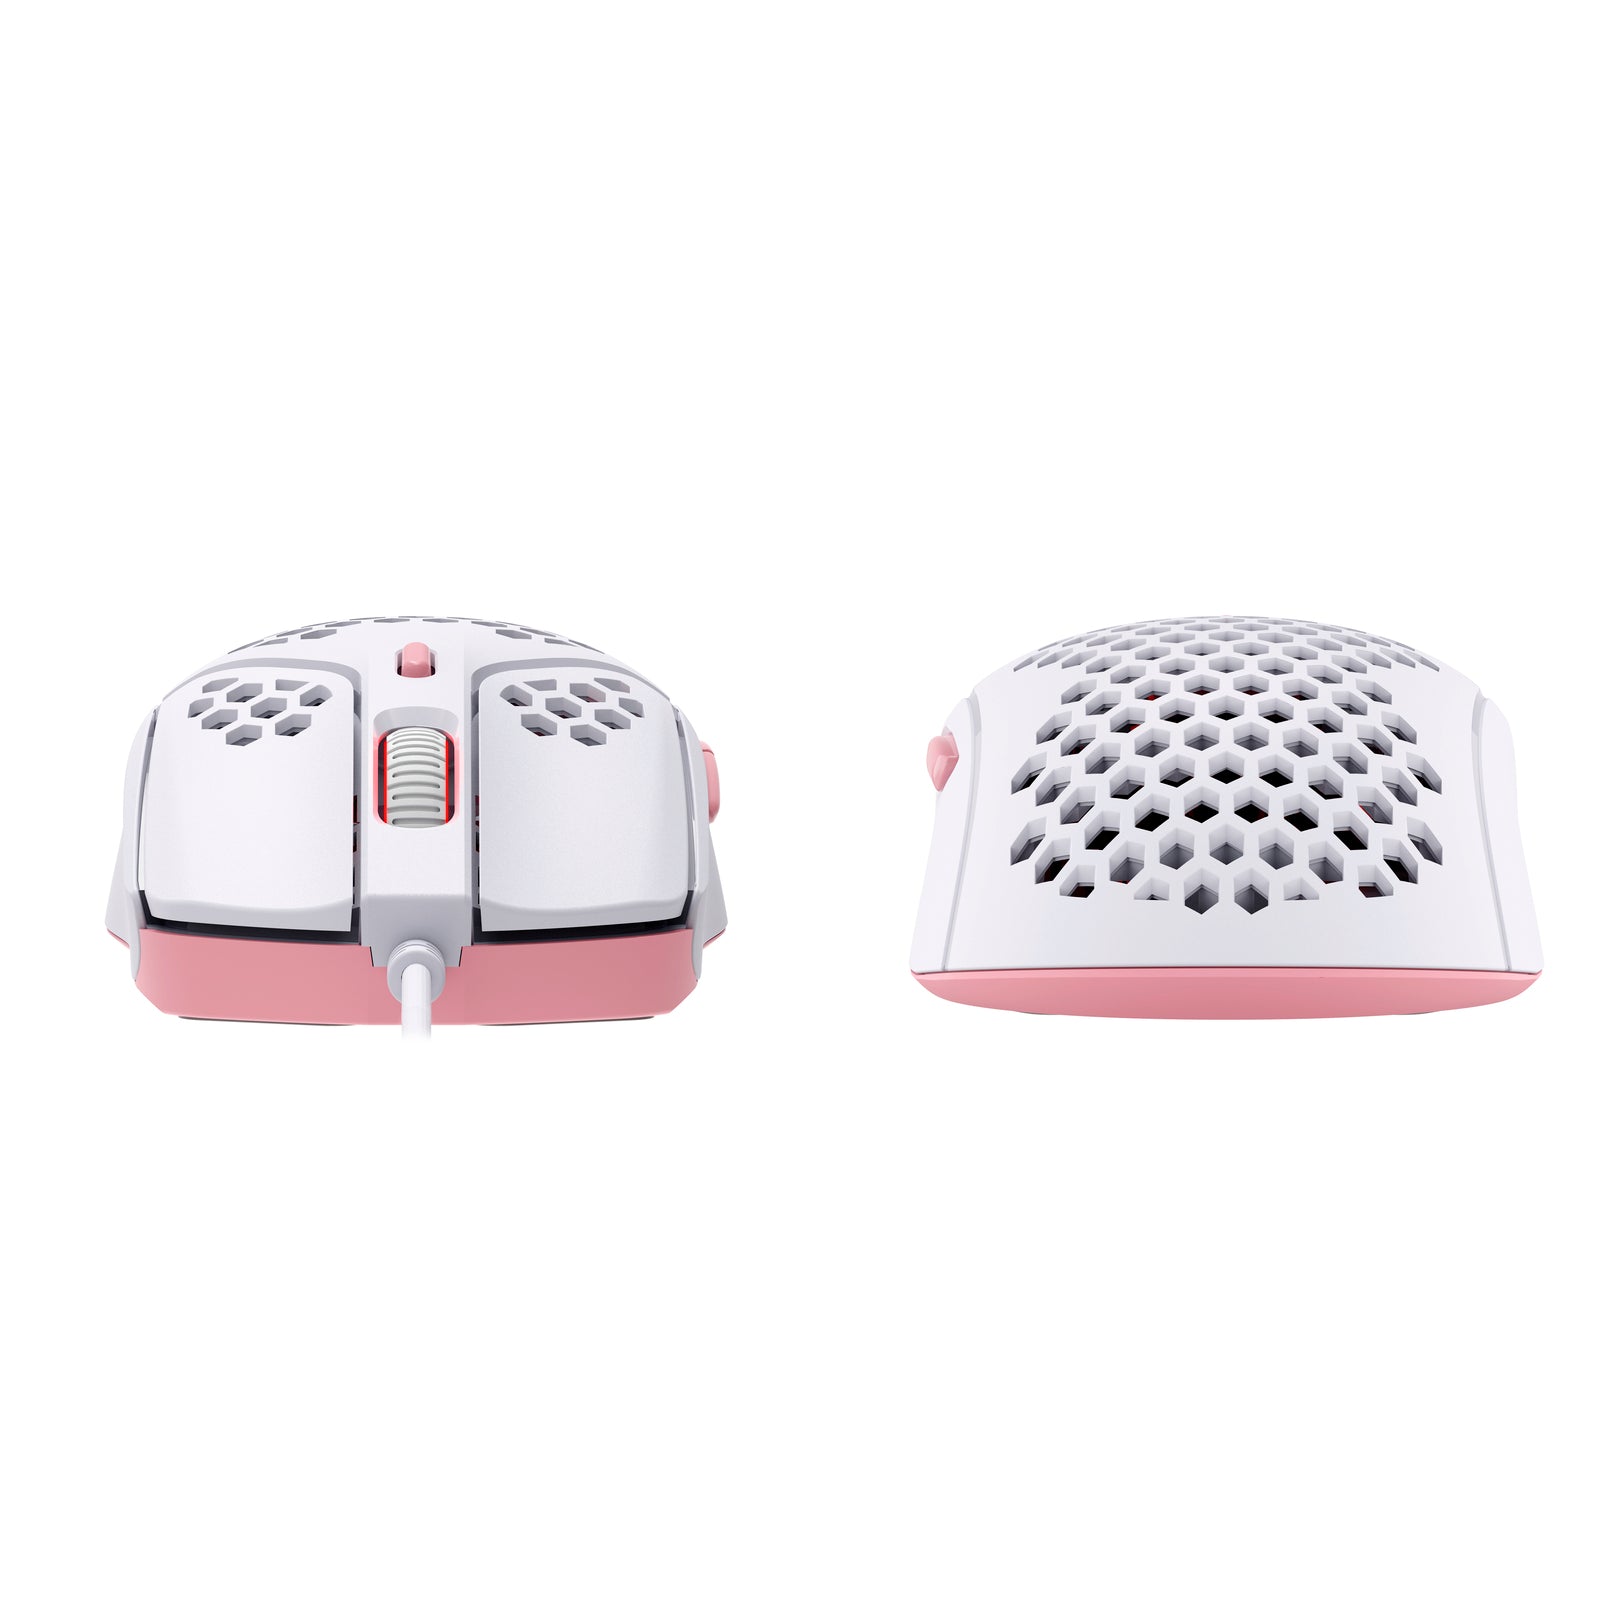 HyperX Pulsefire Haste White-Pink Gaming Mouse - front and back view